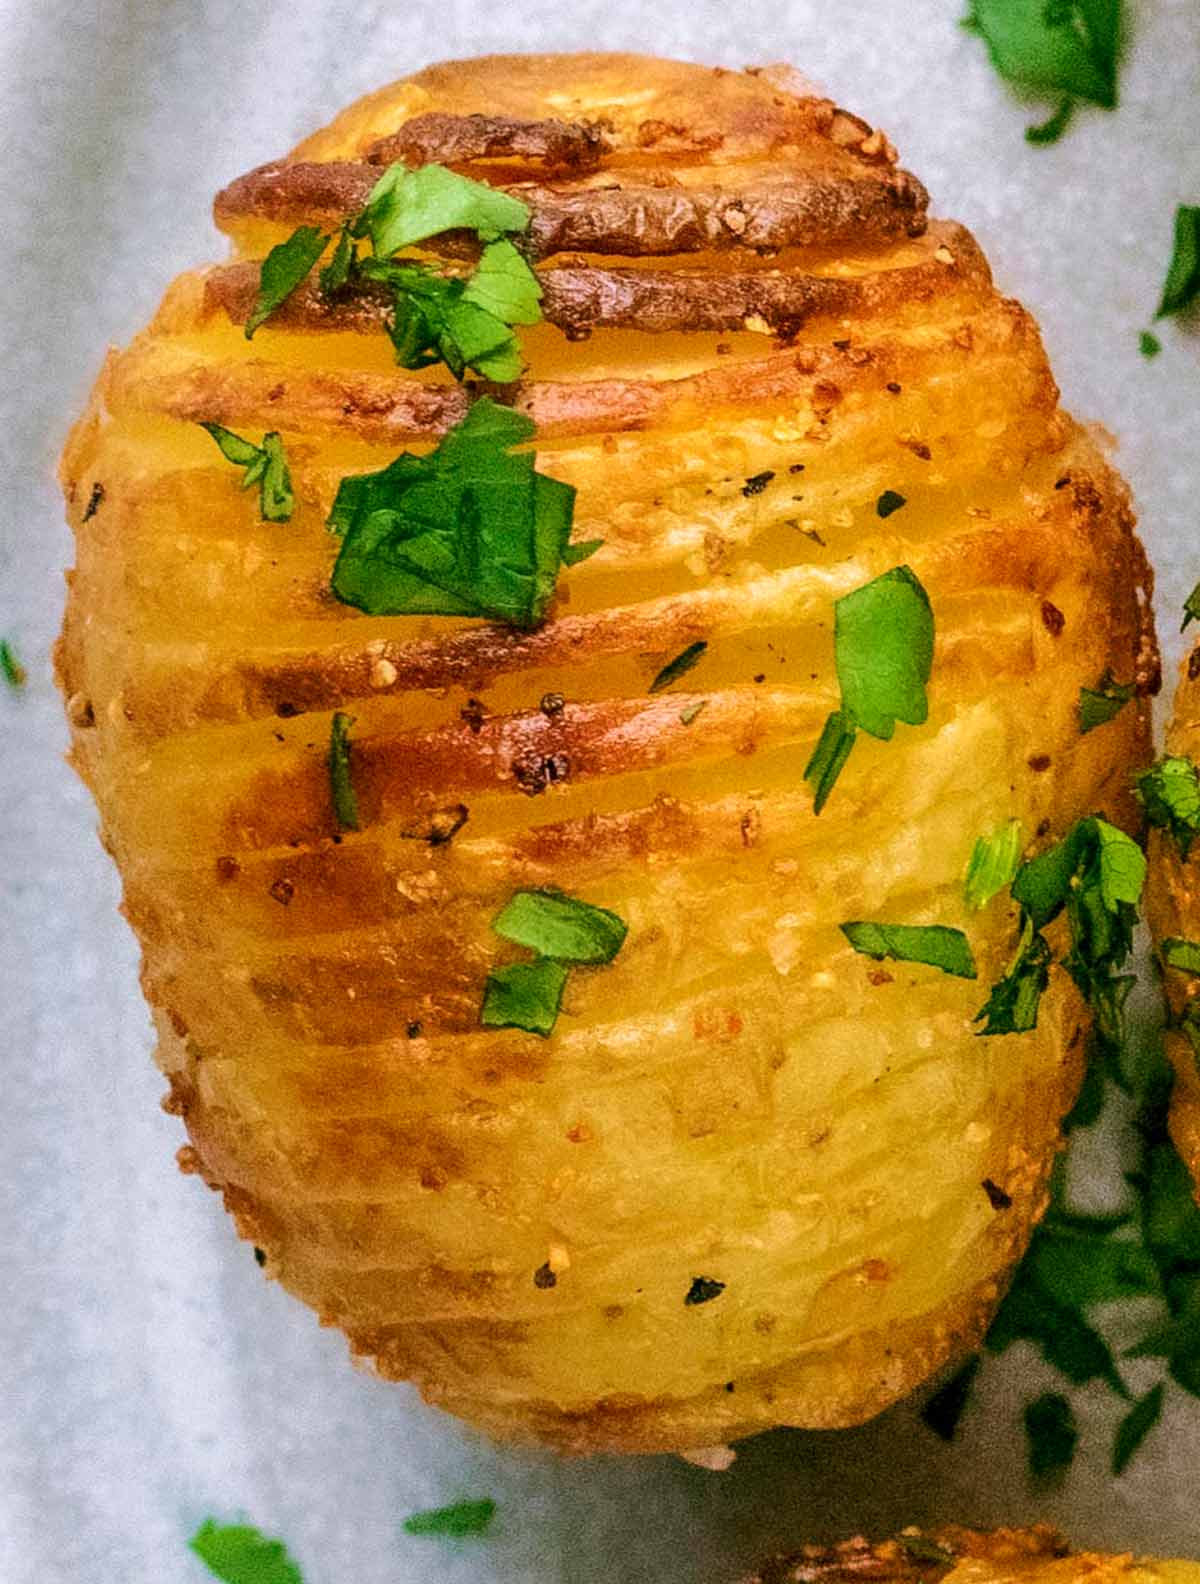 A cooked hasselback potato showing the slices topped with chopped herbs.